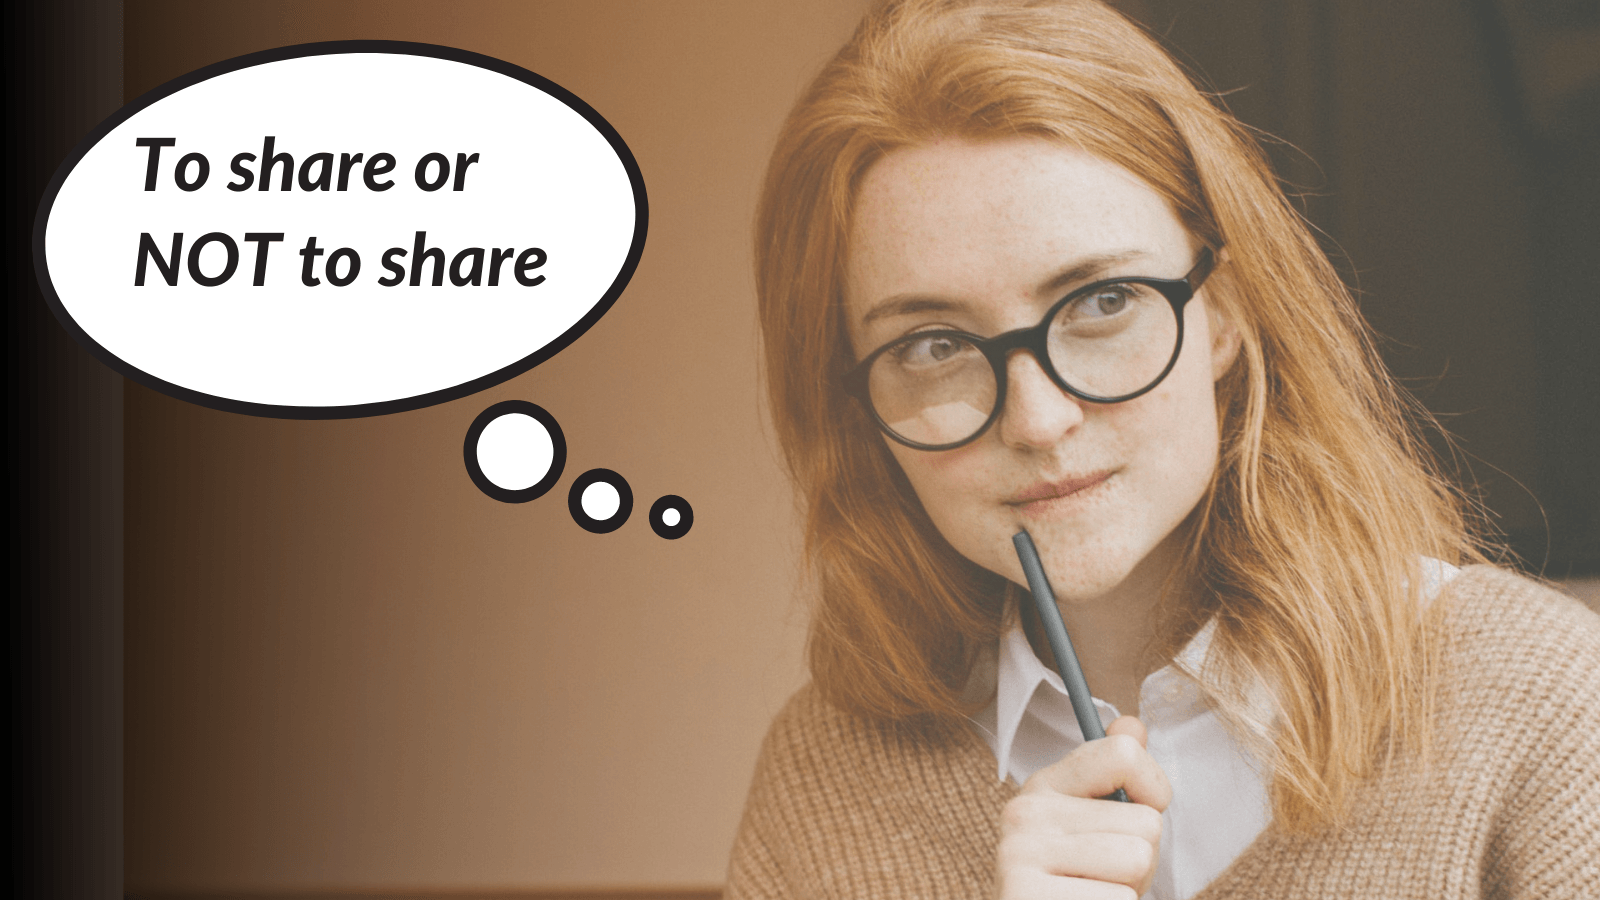 To Share or NOT to share